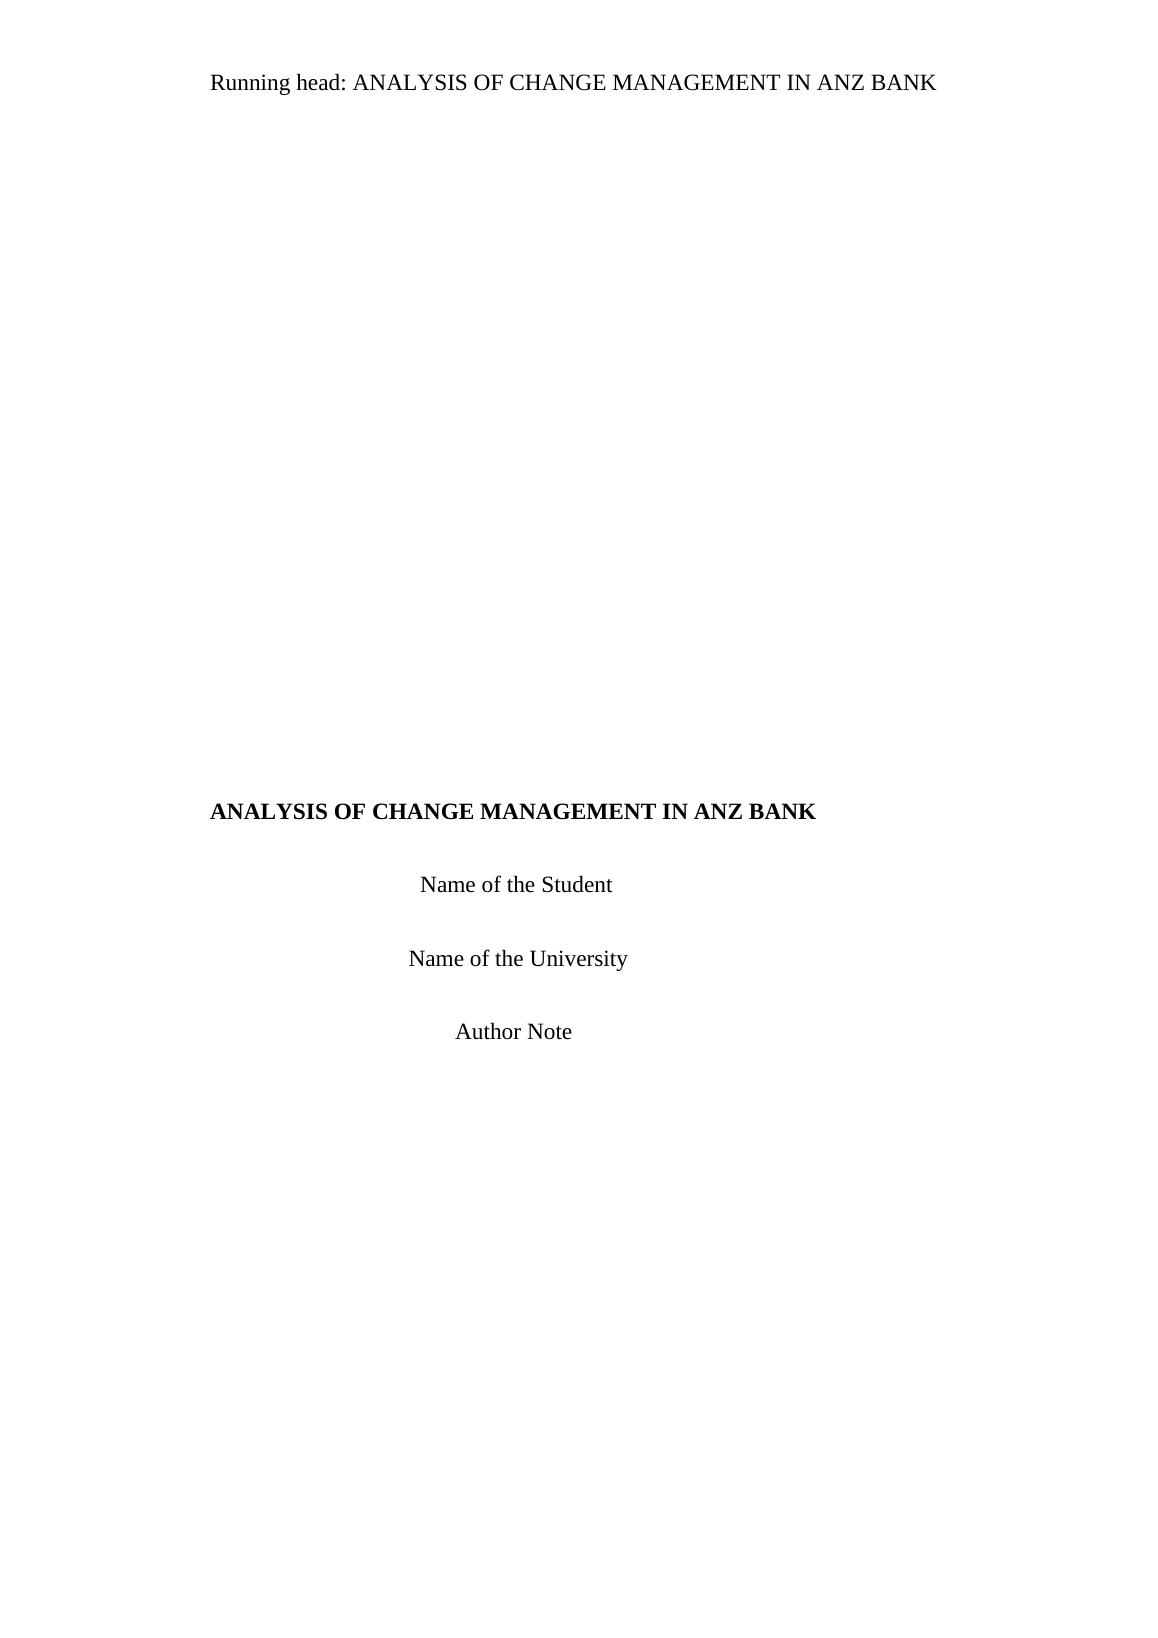 Analysis of Change Management in ANZ Bank_1